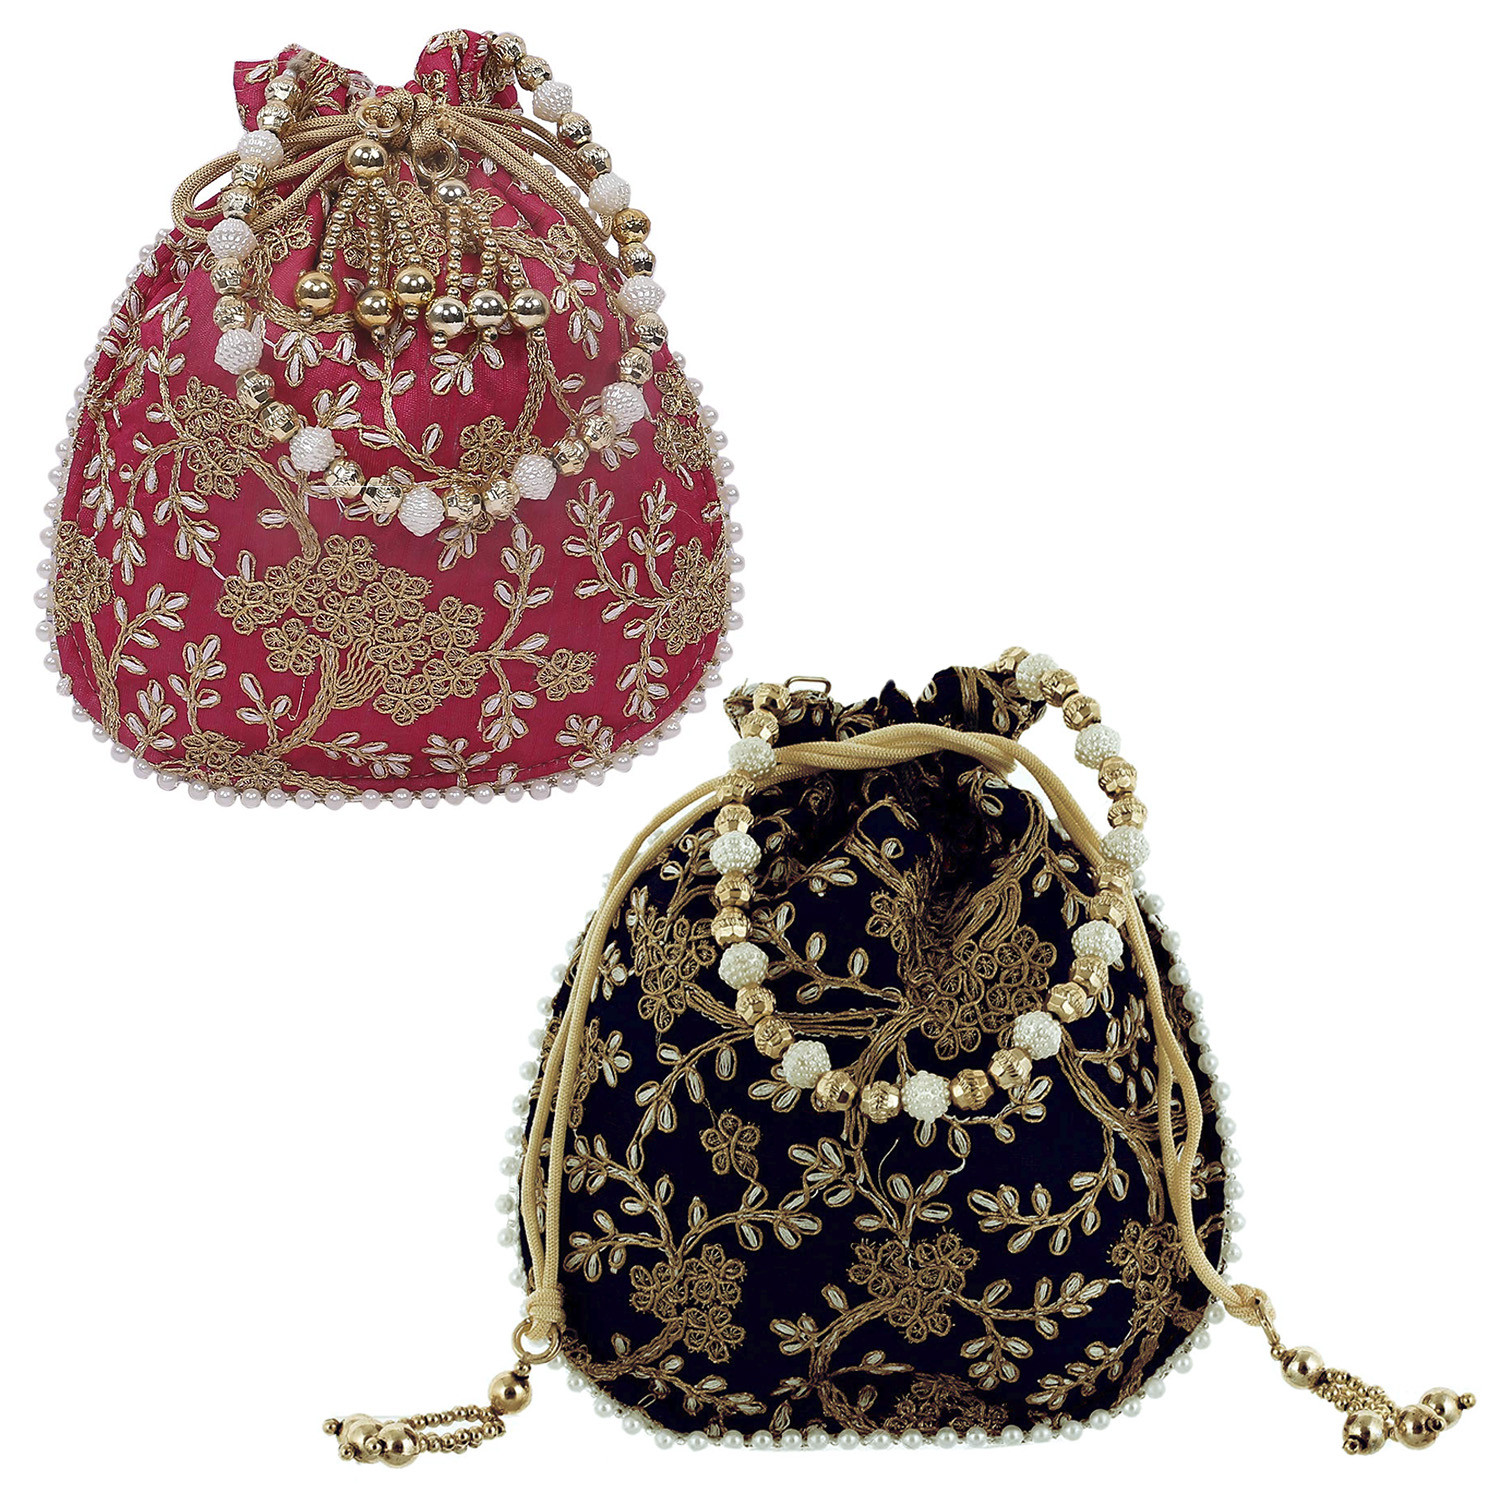 Kuber Industries Embroidery Drawstring Potli|Hand Purse With Gold Pearl Border & Handle For Woman,Girls Pack of 2 (Black & Red)